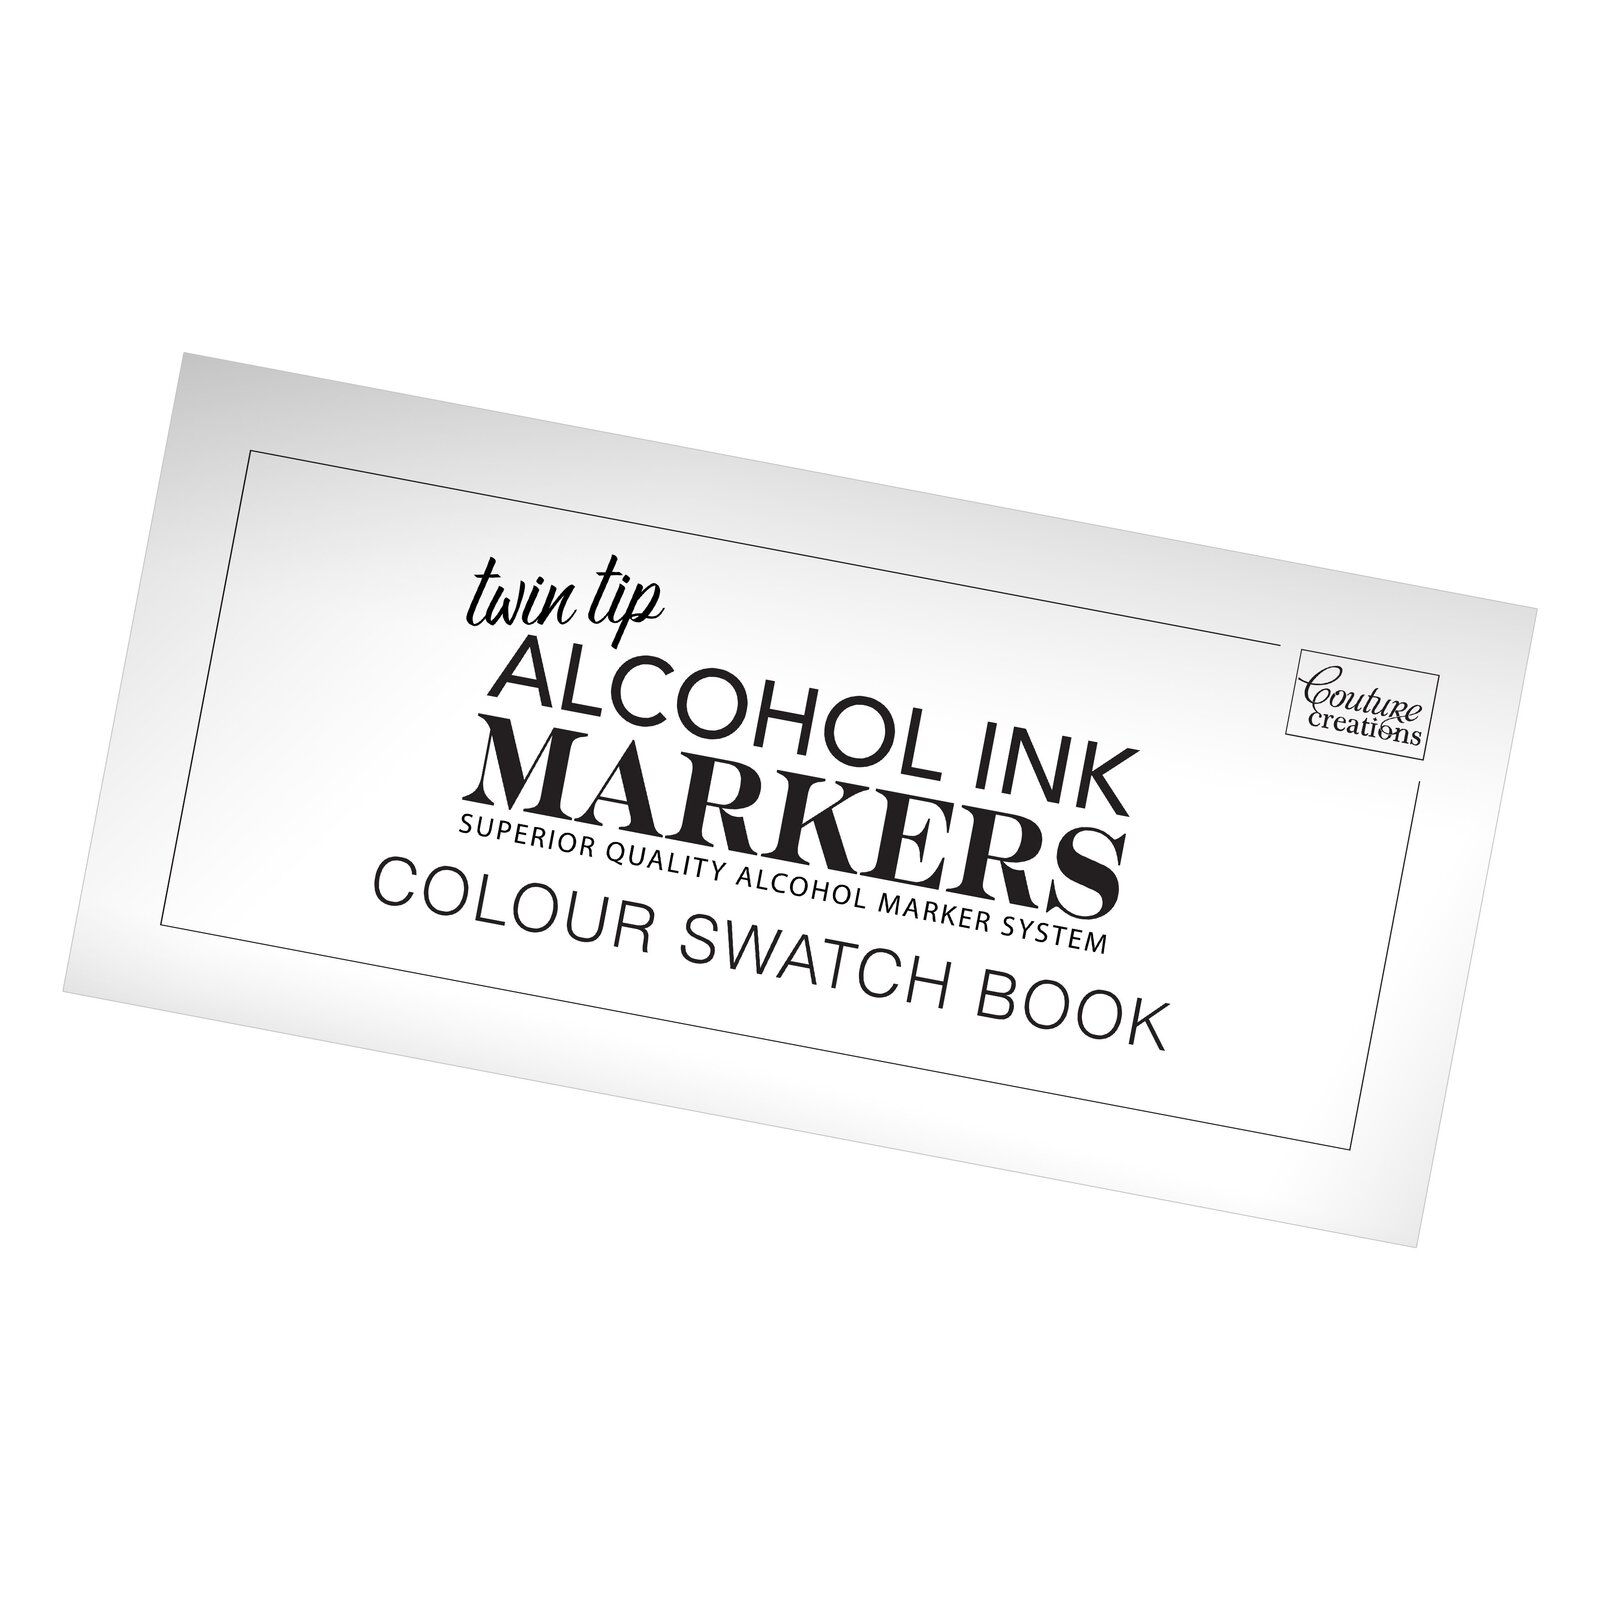 Couture Creations Twin Tip Alcohol Ink Marker Colour Swatch Book<br>